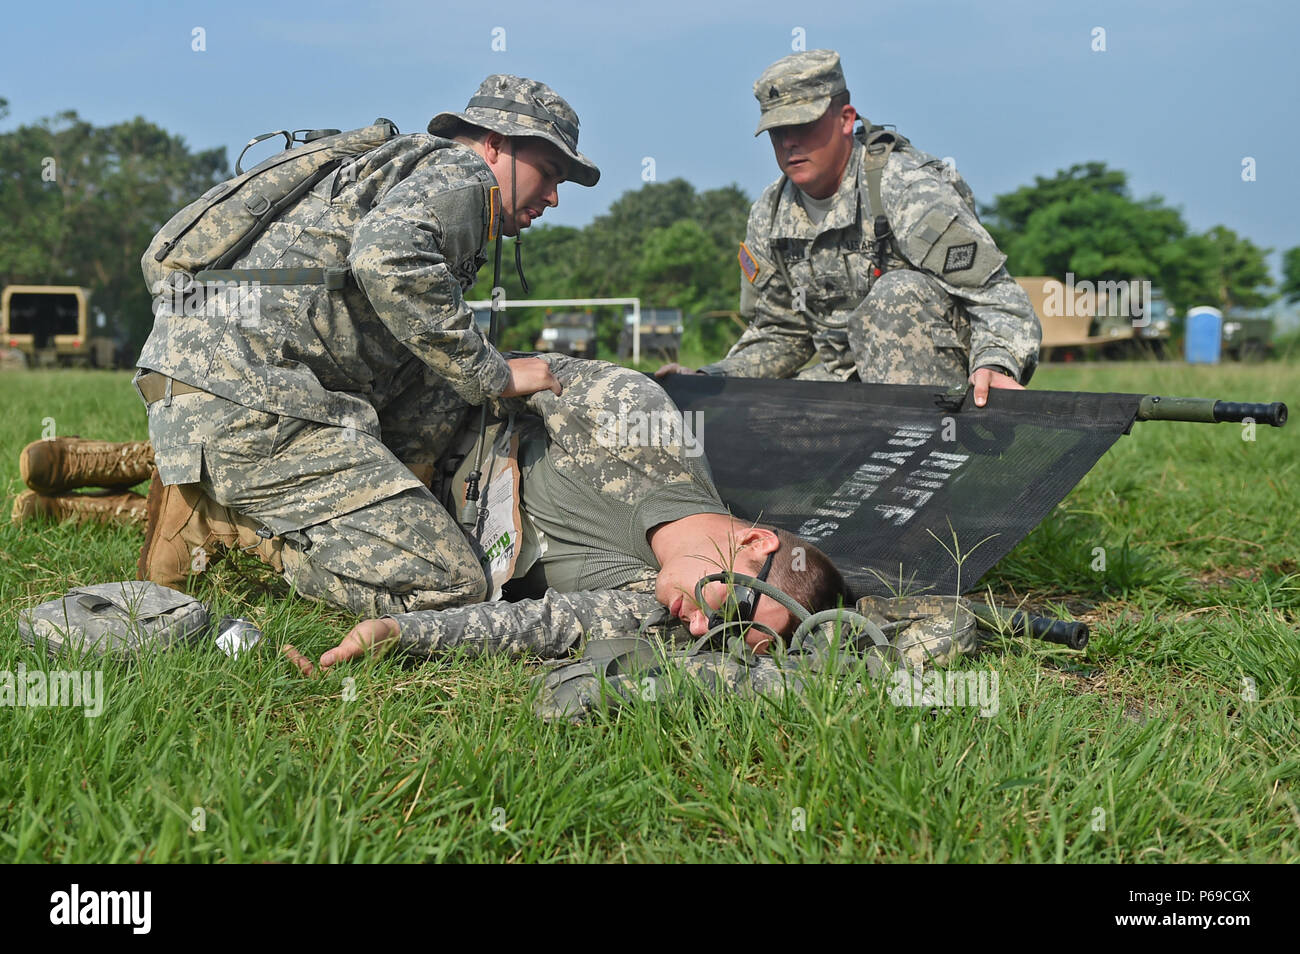 COATEPEQUE, Guatemala – Arkansas National Guardsmen Spc. Michael Williams, left, 296th Ground Ambulance Medical Company medic, and Sgt. John Ballard, right, 871st Troop Command Headquarters and Headquarters Company medic, position a simulated injured Soldier onto a litter during a medical readiness exercise May 26, 2016, during Exercise BEYOND THE HORIZON 2016 GUATEMALA. Arkansas National Guard Spc. Cameron Chailland, 875th Forward Support Company loader and machinist, played the role of the patient while Williams and Ballard trained to perform field-medical treatment. (U.S. Air Force photo by Stock Photo